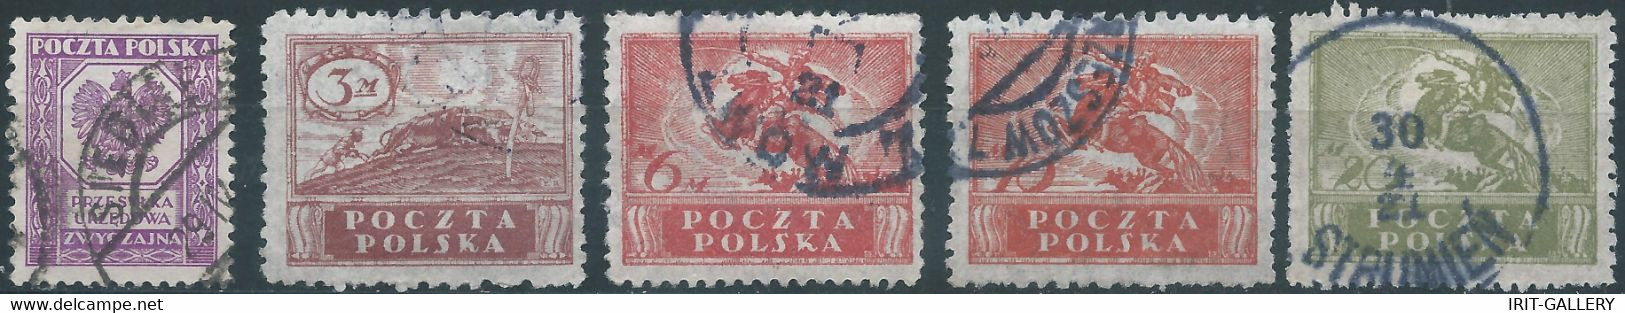 POLONIA-POLAND-POLSKA,1919 South And North Poland Issues,Obliterated - Oblitérés